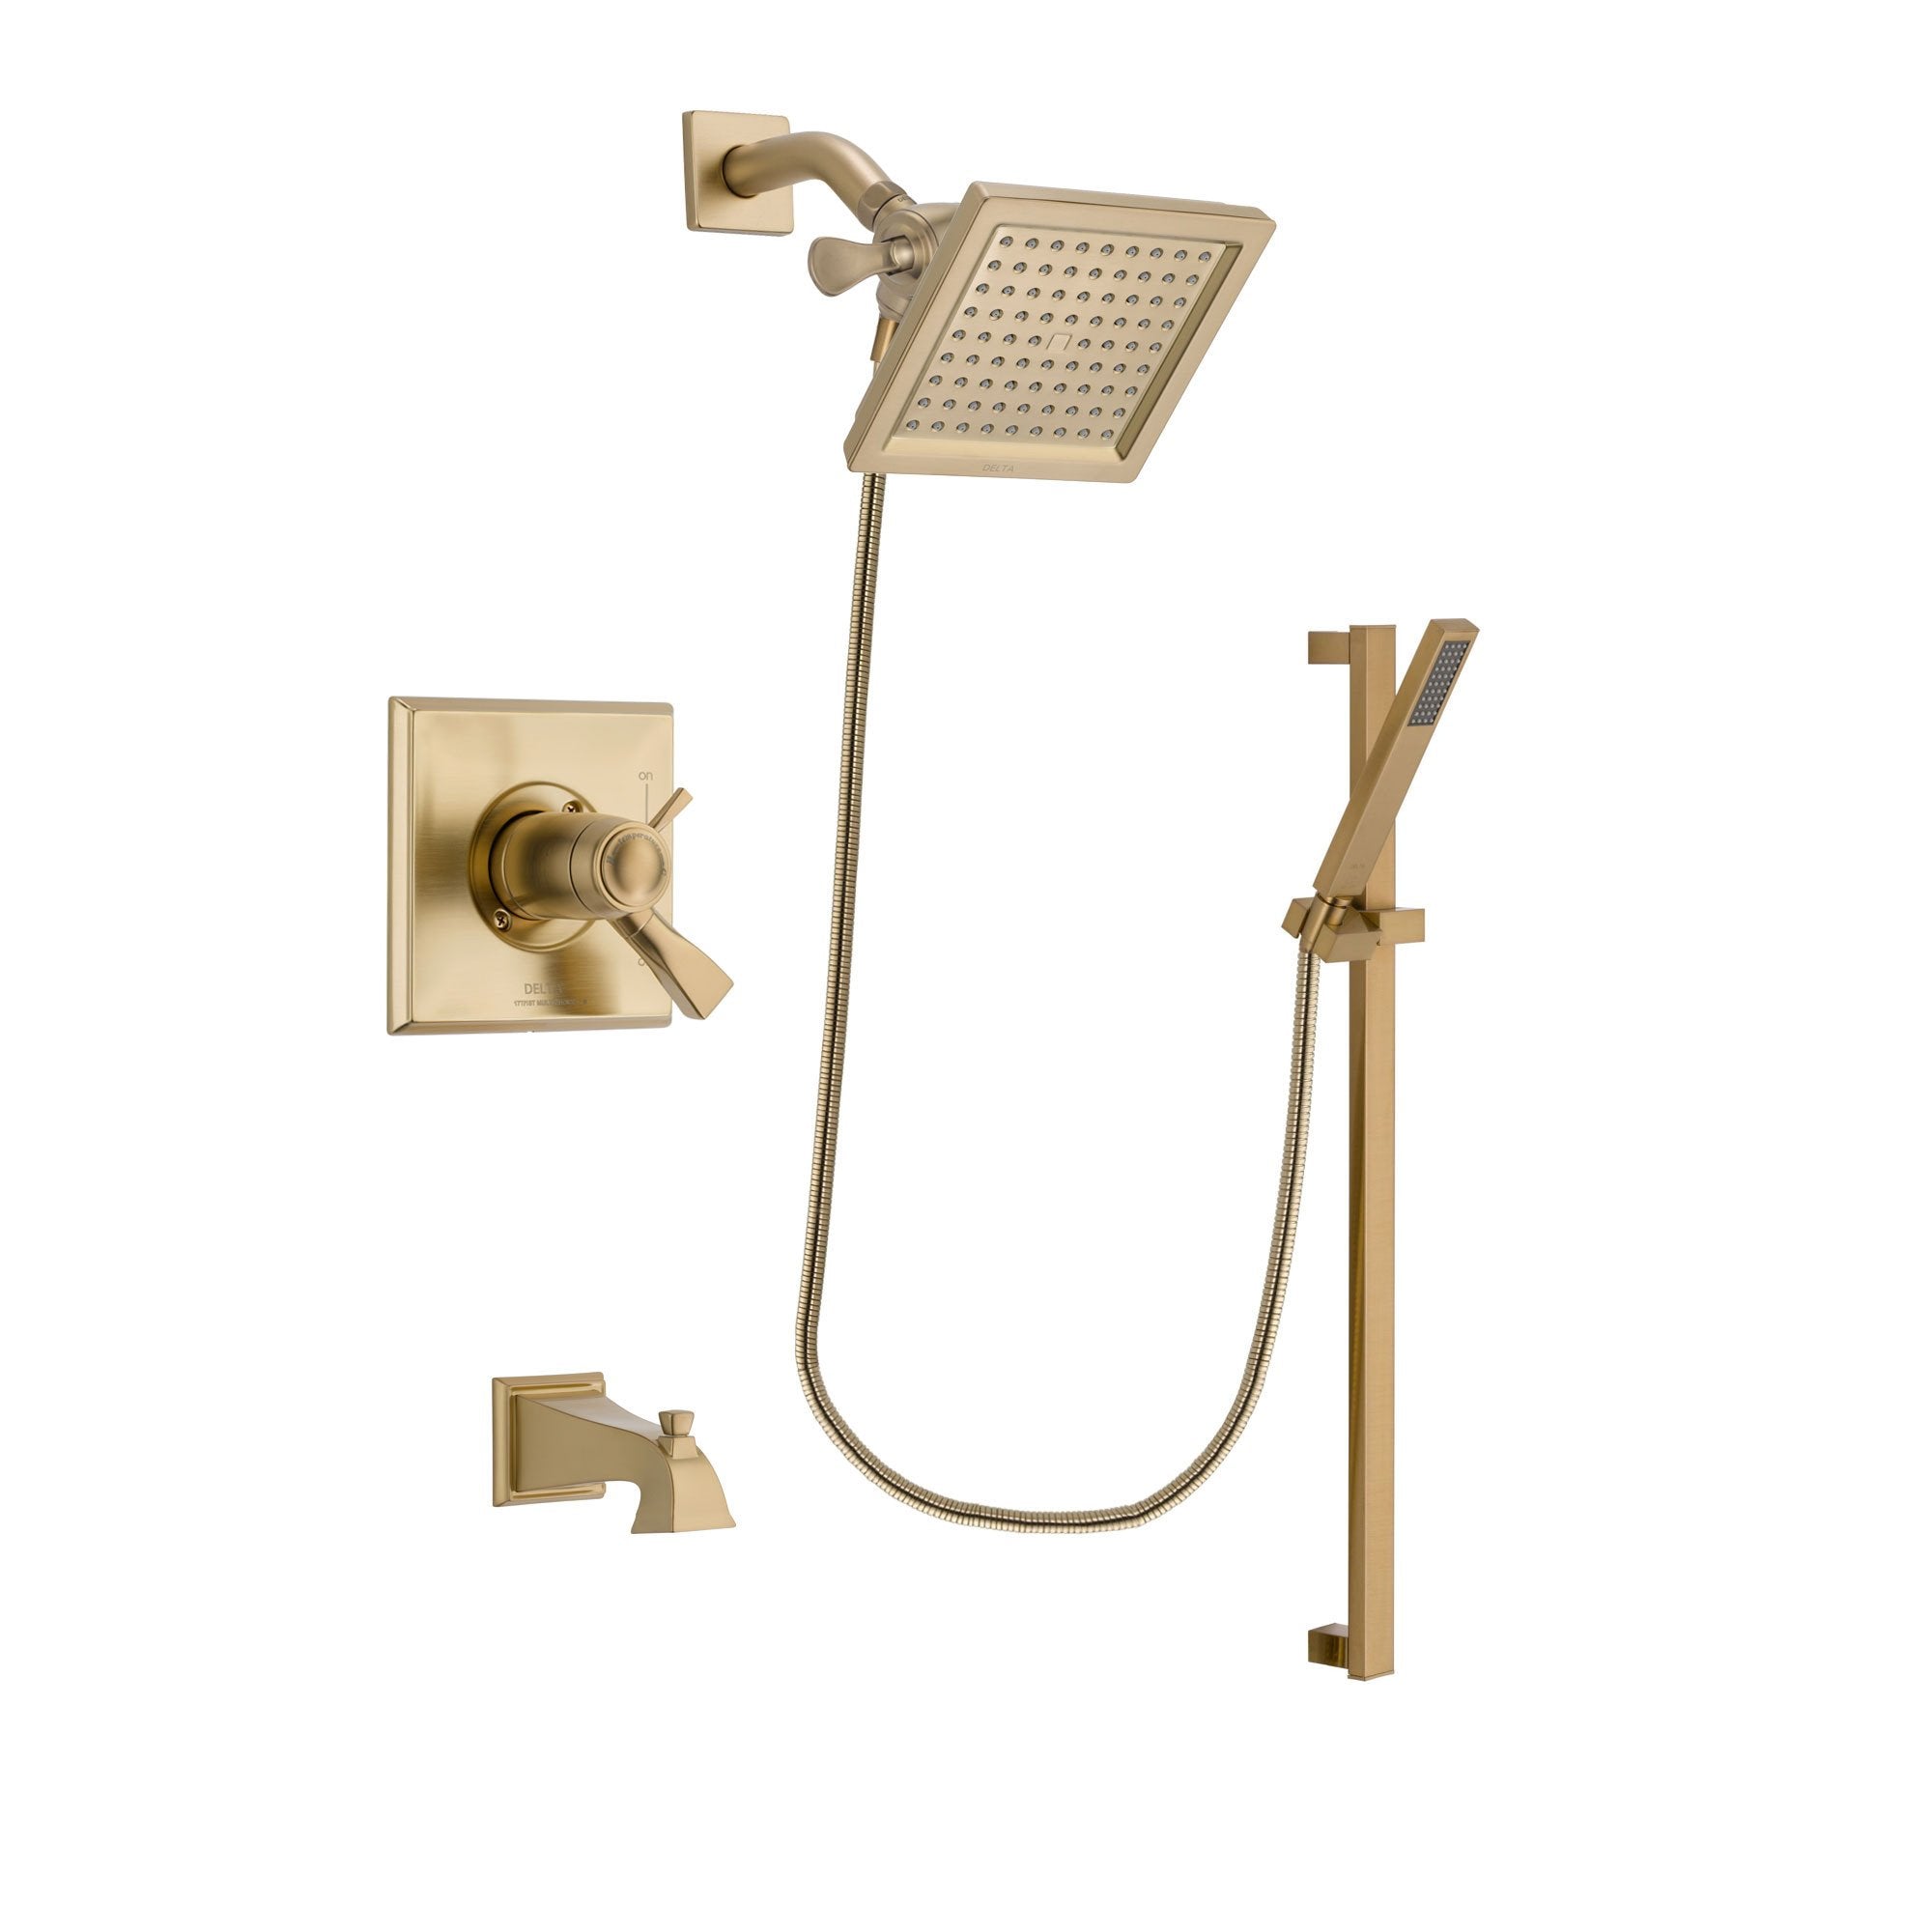 Delta Dryden Champagne Bronze Finish Thermostatic Tub and Shower Faucet System Package with 6.5-inch Square Rain Showerhead and Modern Handheld Shower with Square Slide Bar Includes Rough-in Valve and Tub Spout DSP3993V